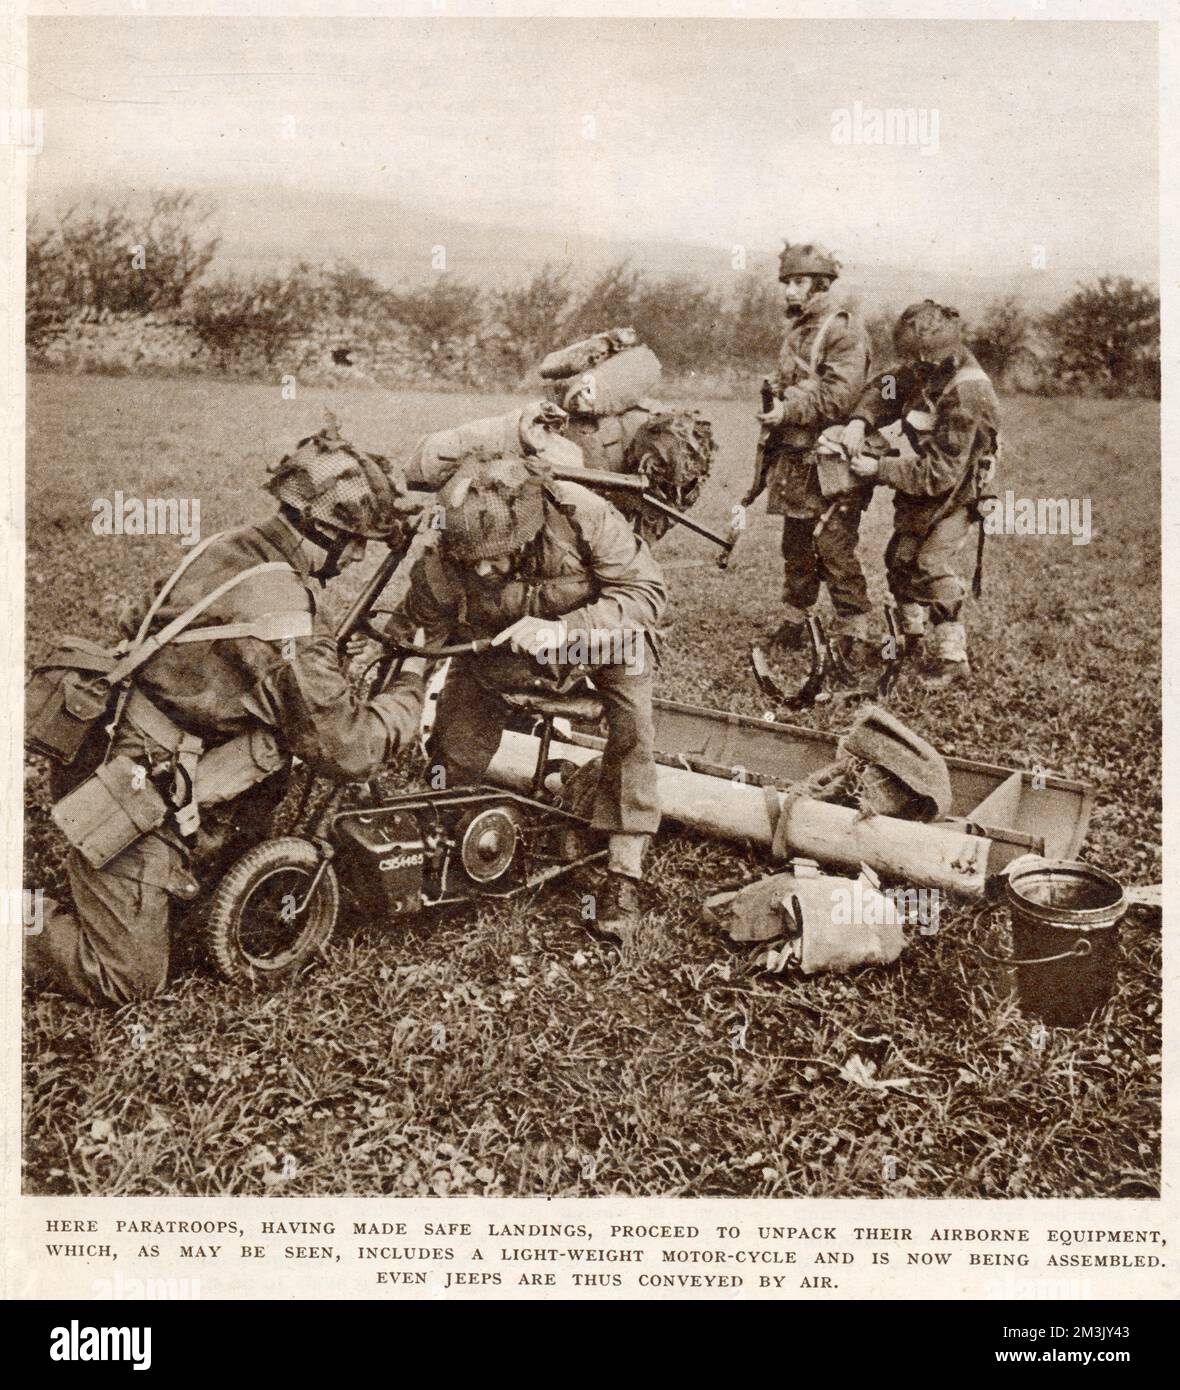 A group of British paratroops readying themselves after landing, during an exercise taking place in England in 1944.   The two men in the foreground are seen assembling a lightweight motorcycle, whilst those in the background are packing their gear. Stock Photo